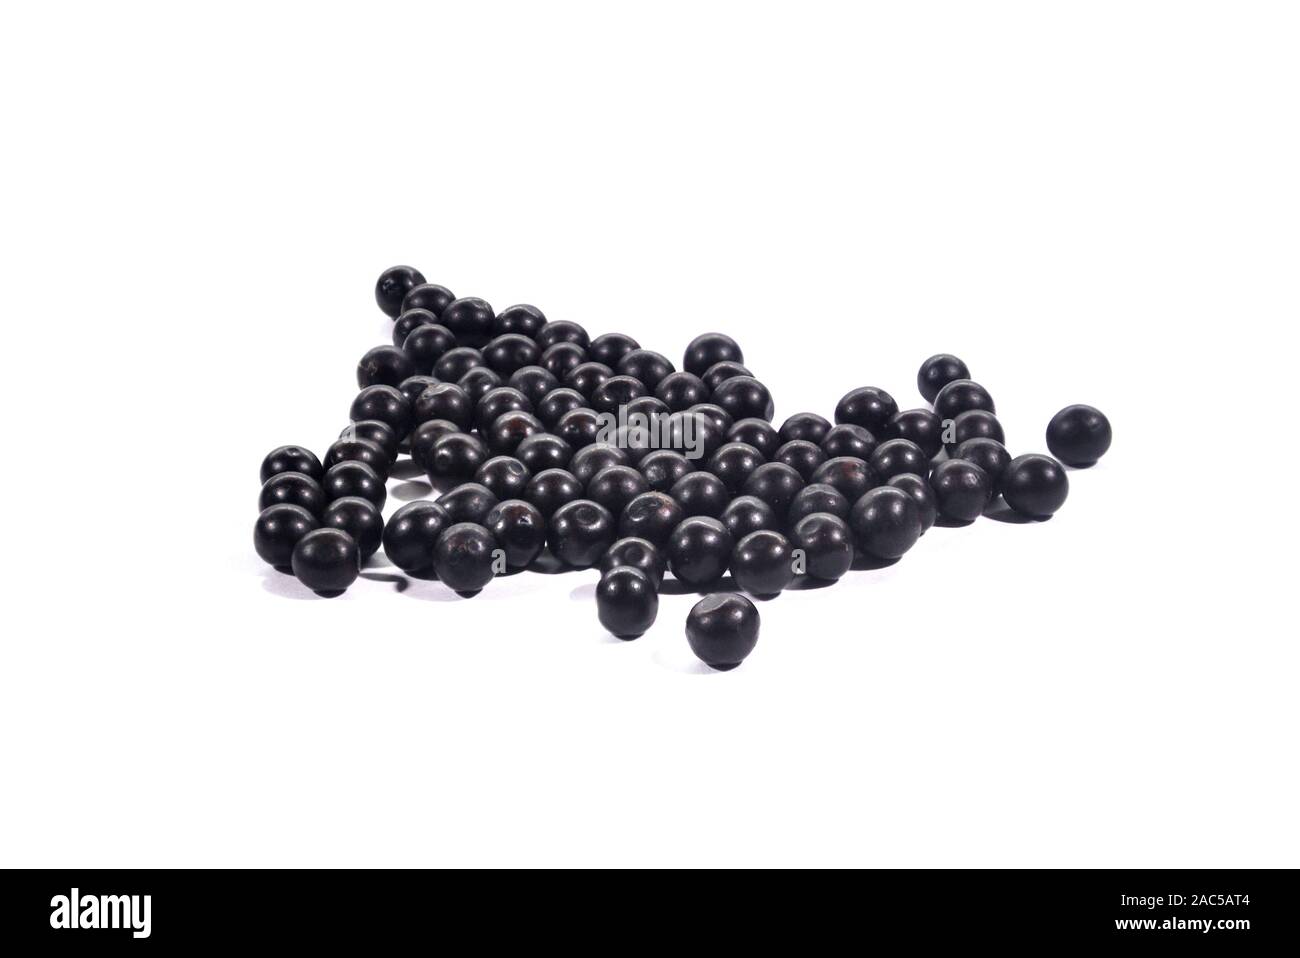 Black Onyx Garden Flower Seeds are hard seeds laid on a white background. Stock Photo